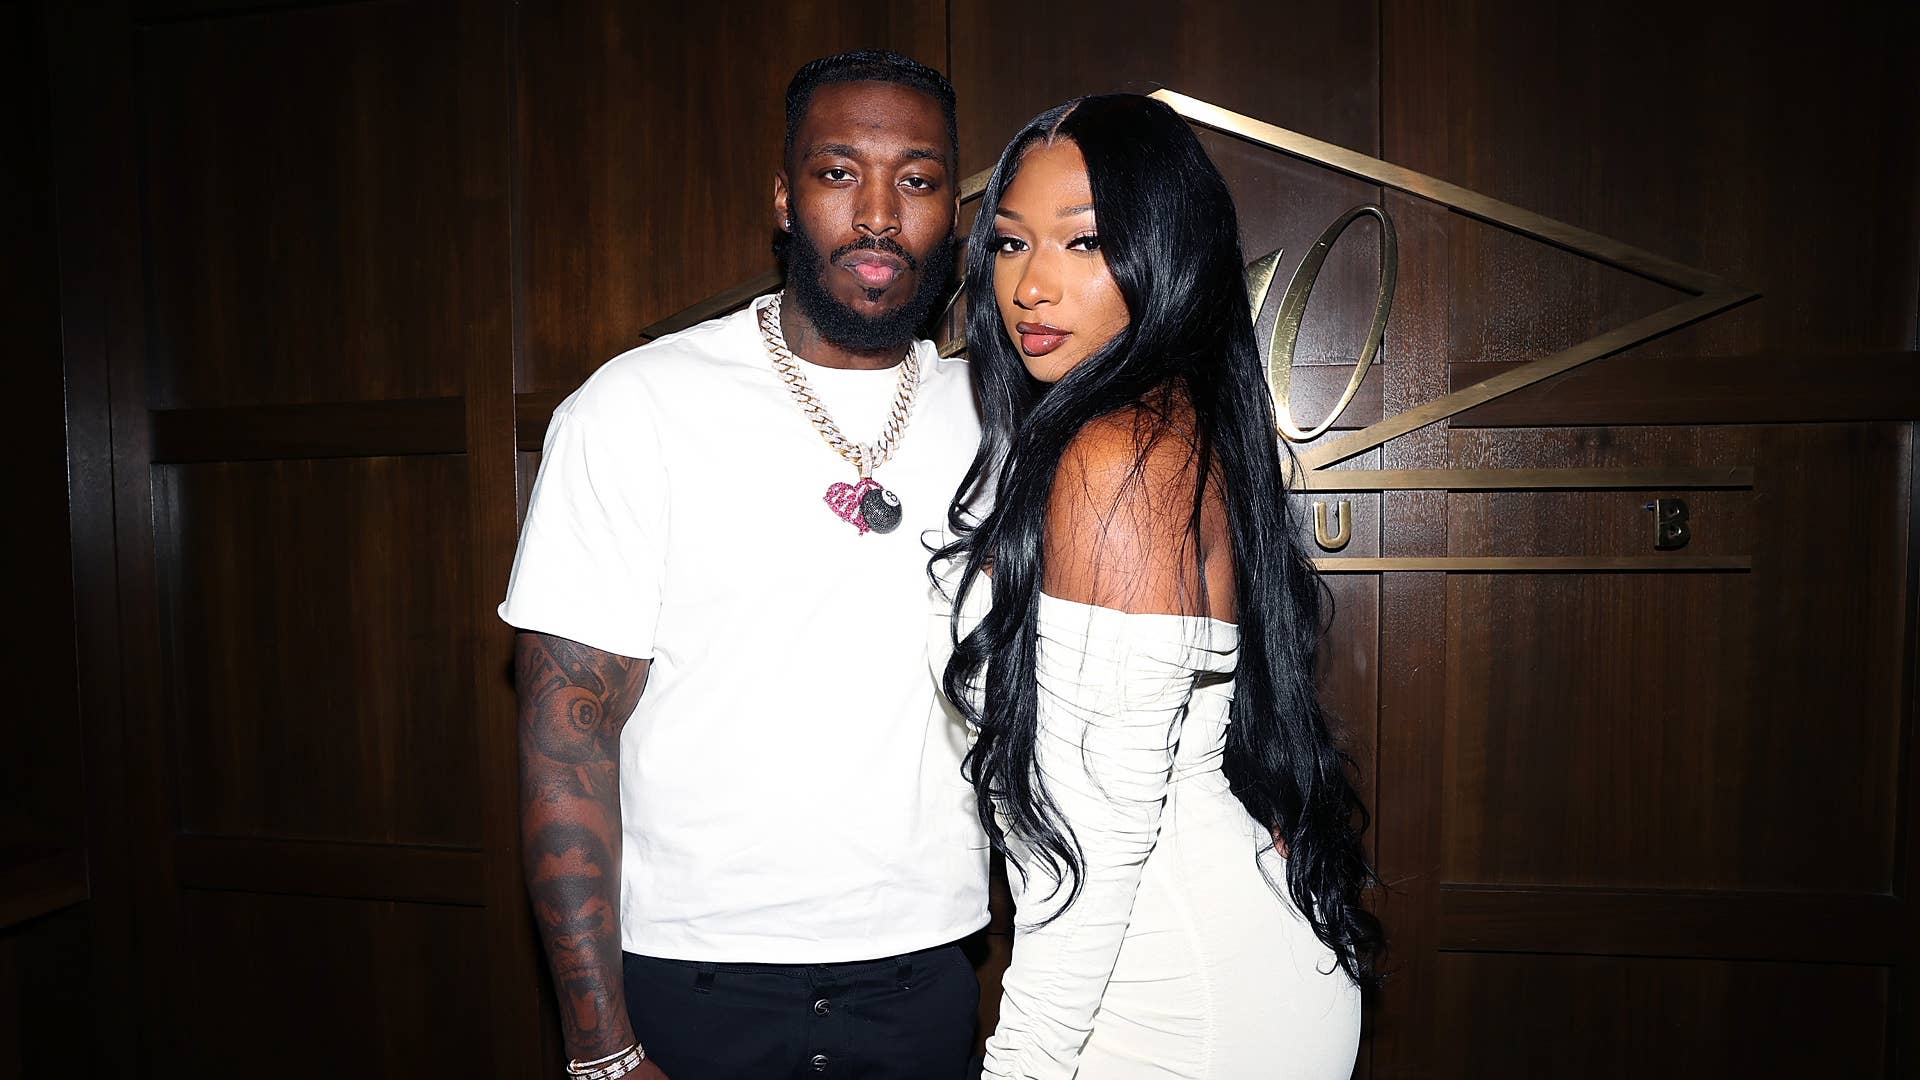 Megan Thee Stallion and Pardi Fontaine pose for photo together.